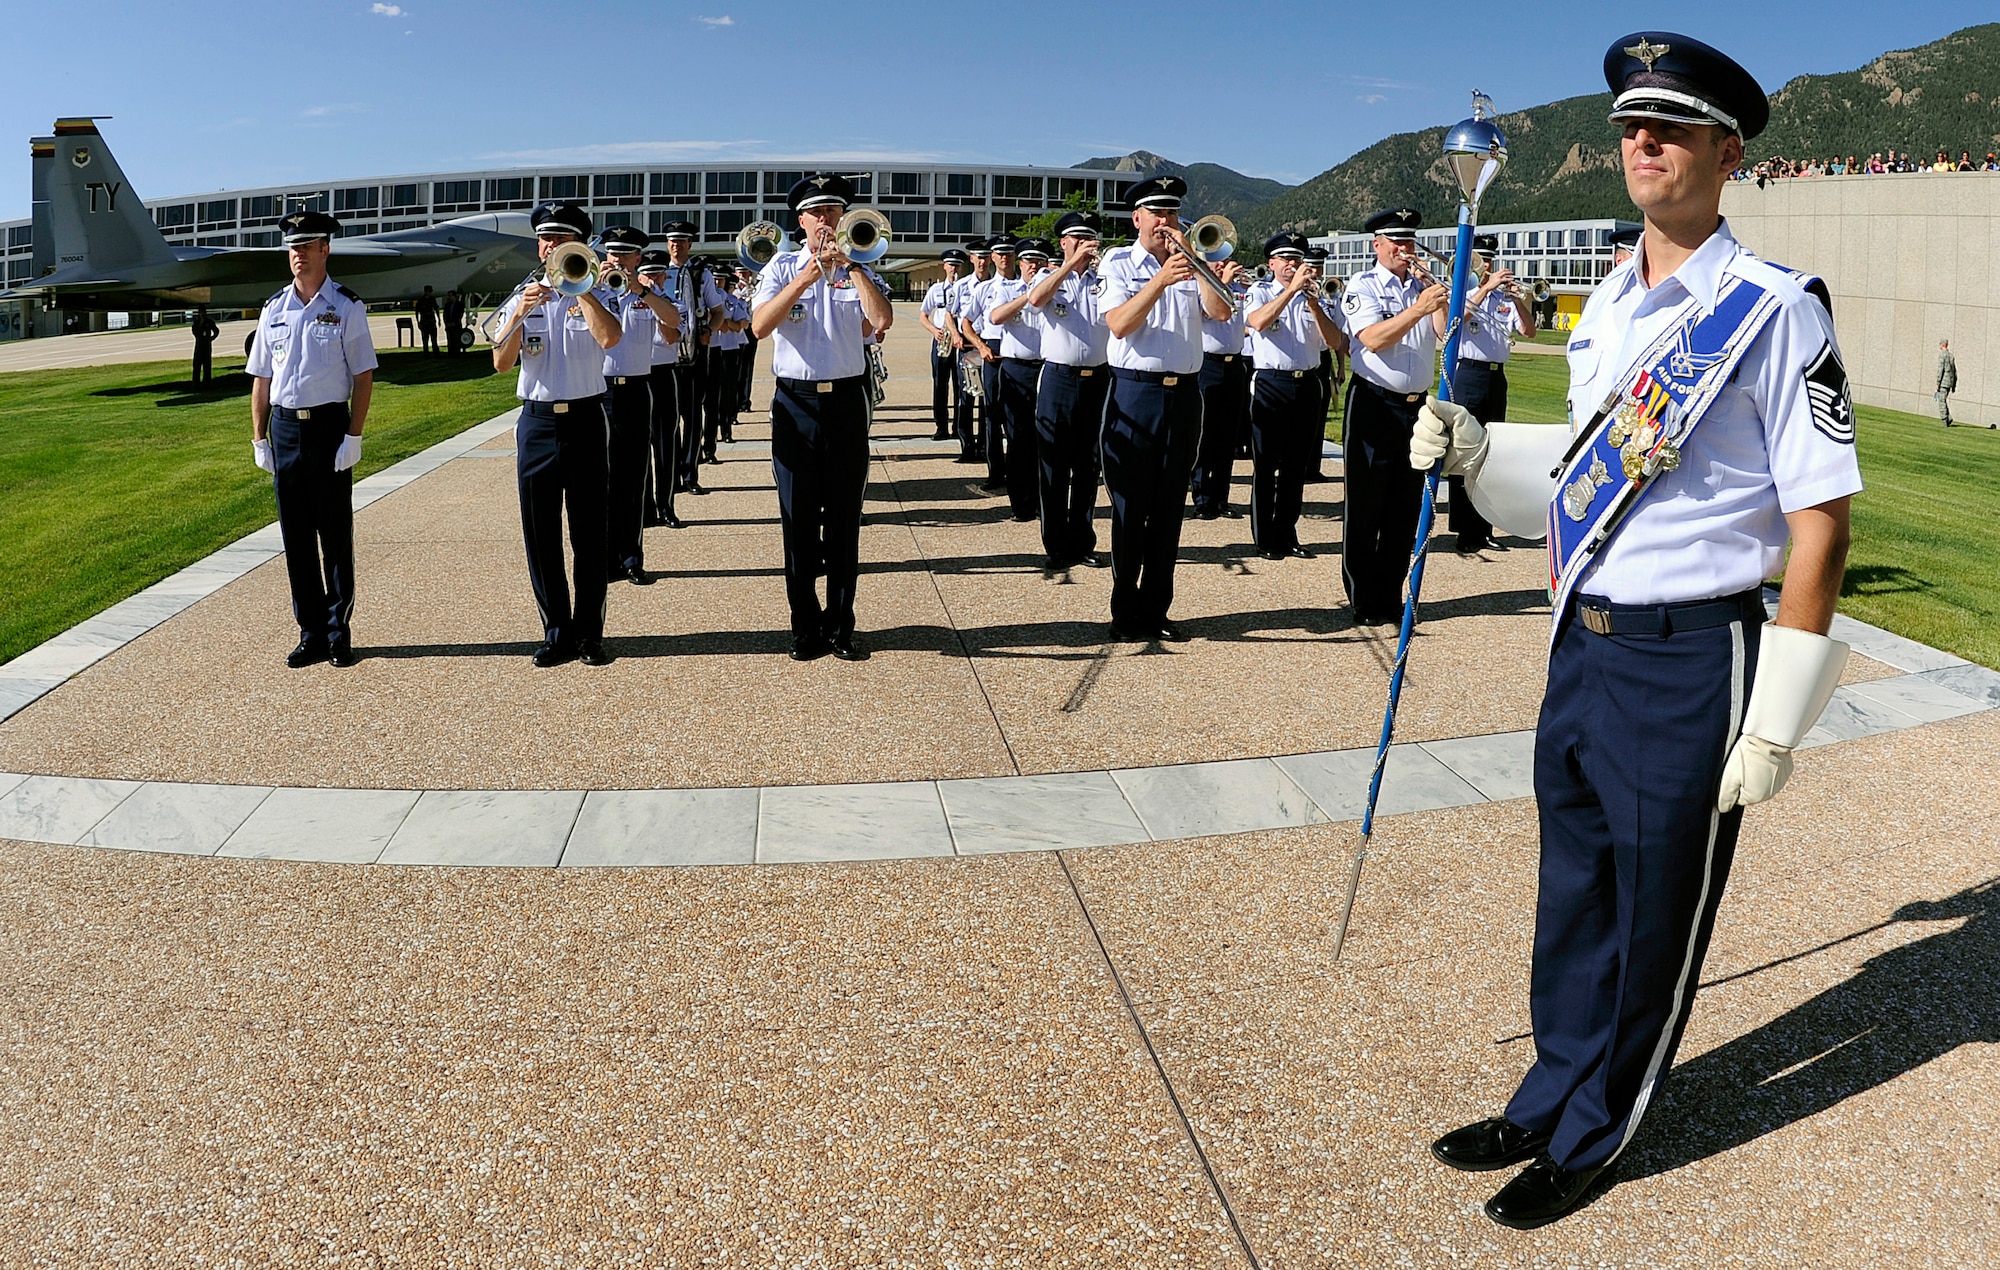 The U.S. Air Force Academy Band performs for the Class of 2014 swearing-in ceremony at the Academy in Colorado Springs, Colo., June 25, 2010. The Air Force Academy band, one of 12 active-duty Air Force bands around the world, is stationed at nearby Peterson Air Force Base. (U.S. Air Force photo/Mike Kaplan)